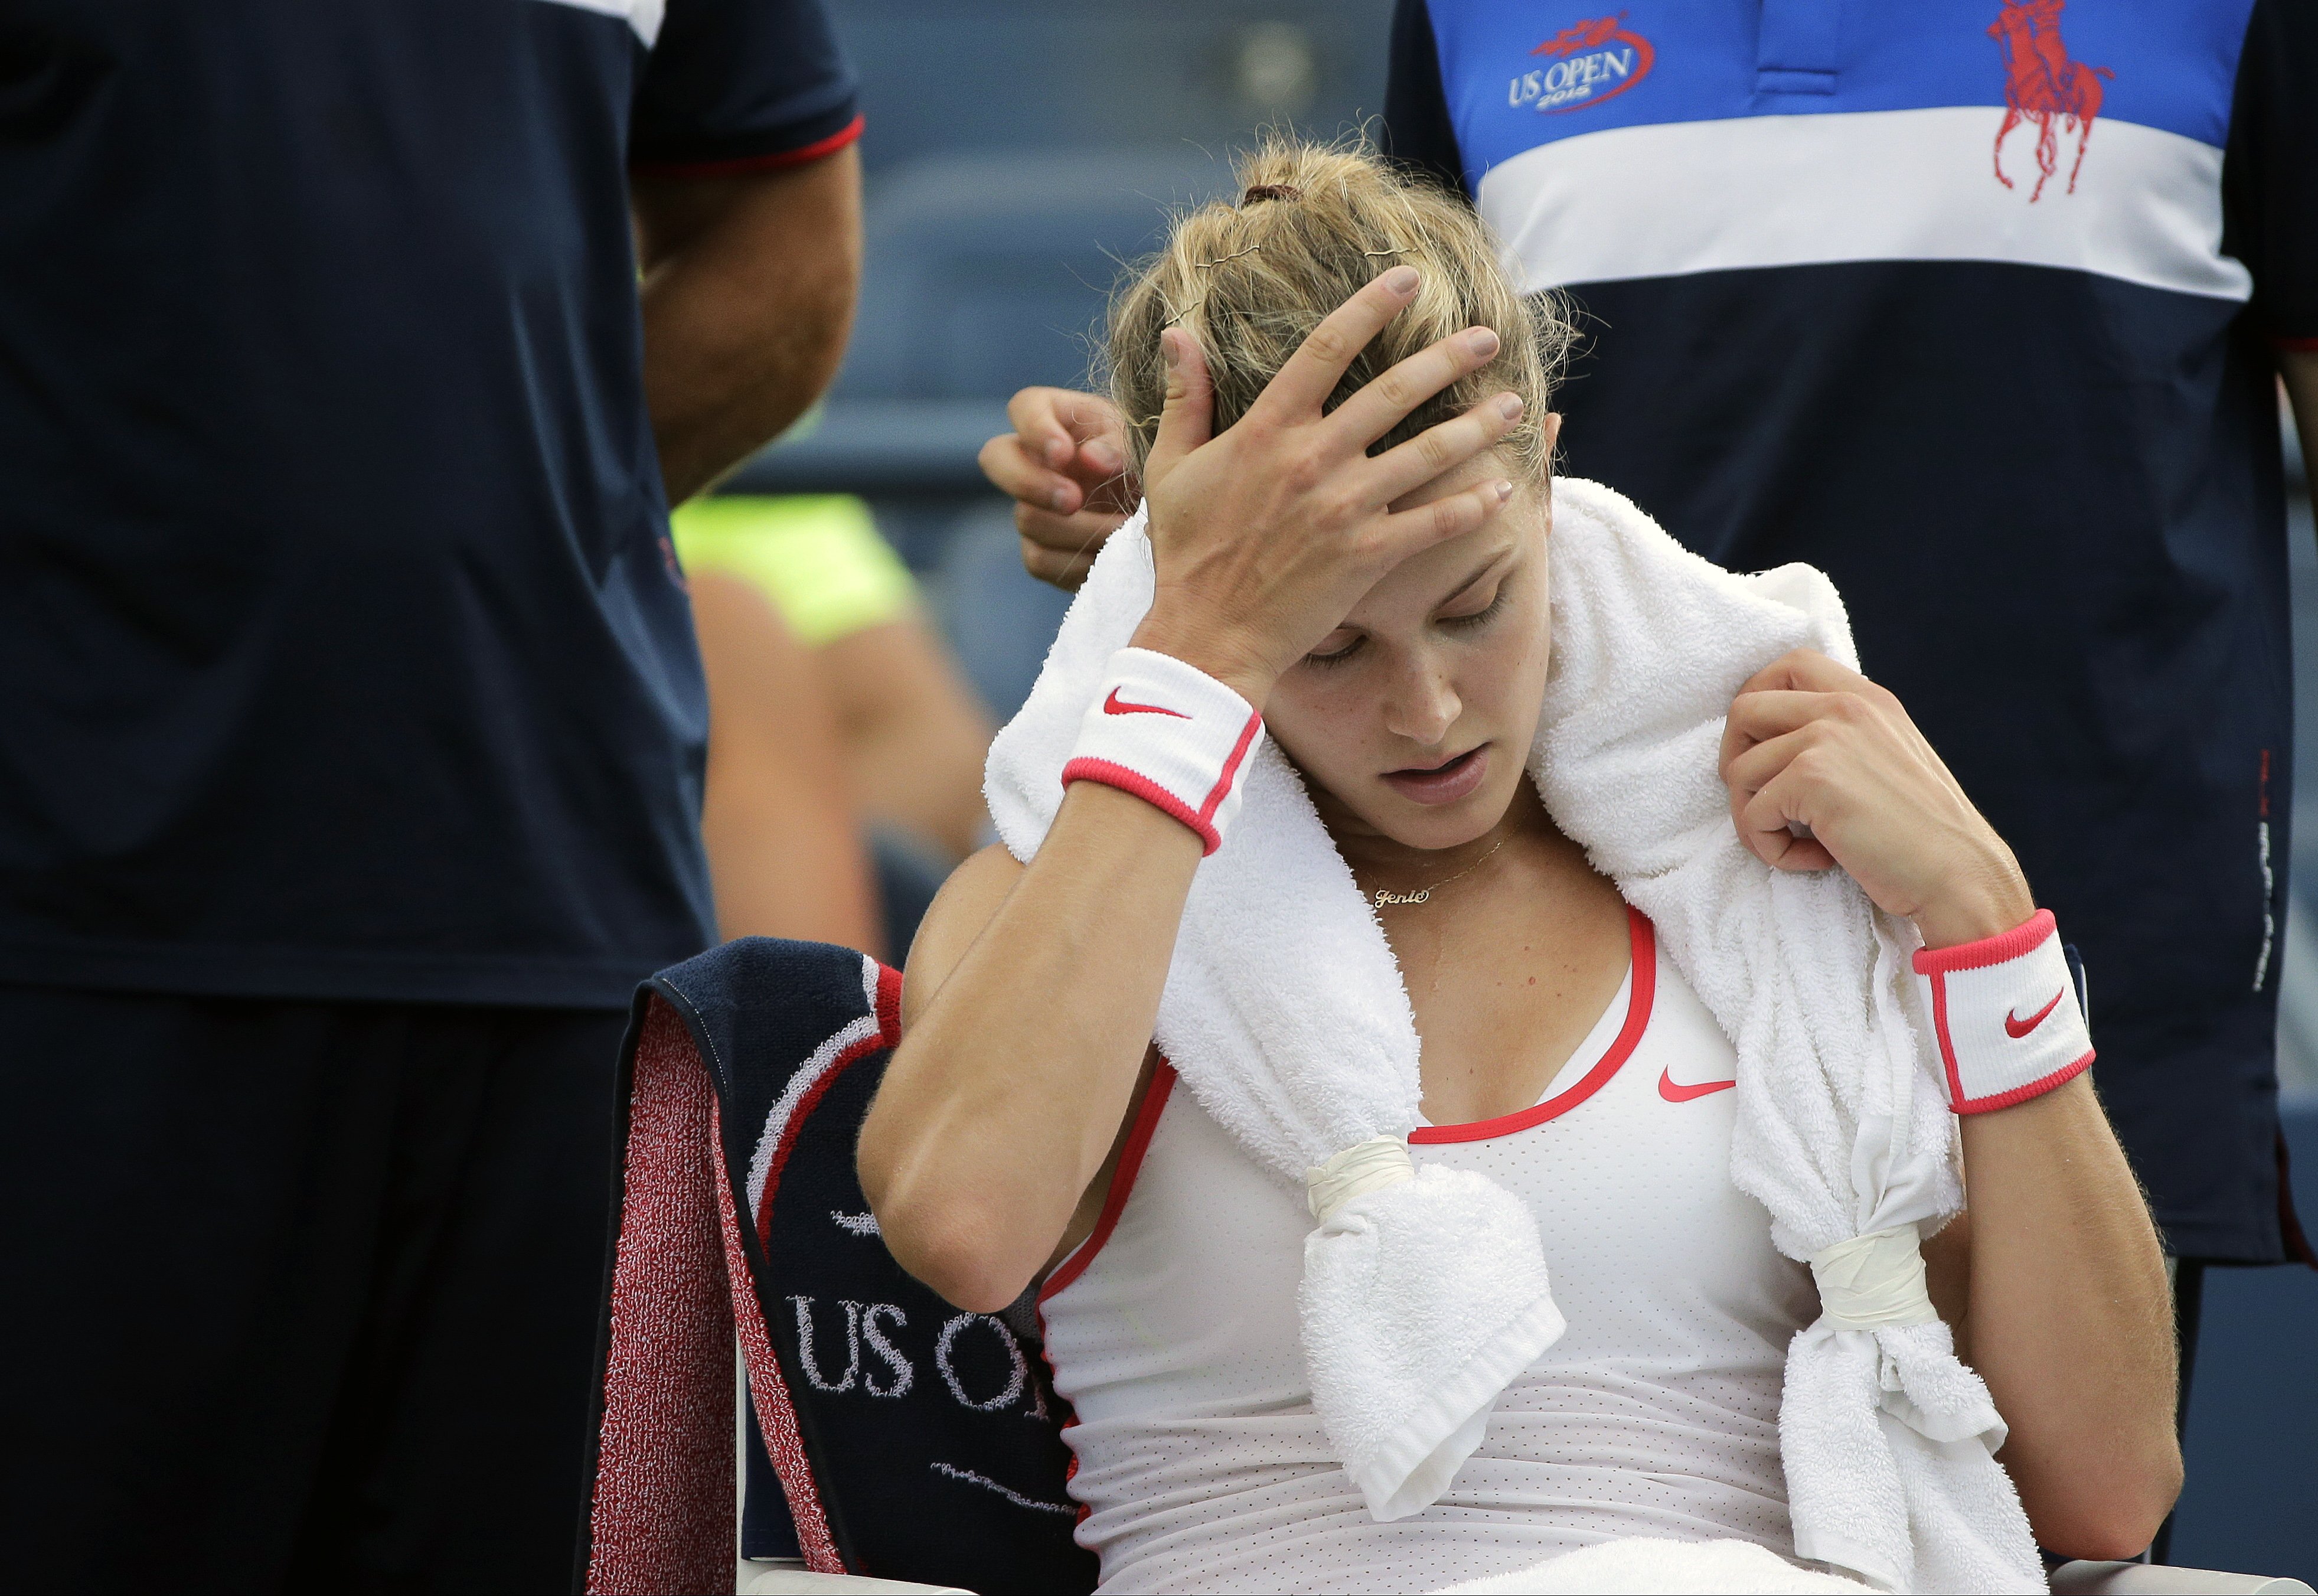 Eugenie Bouchard fell over in the locker room on Friday and banged her head. Photo: AP